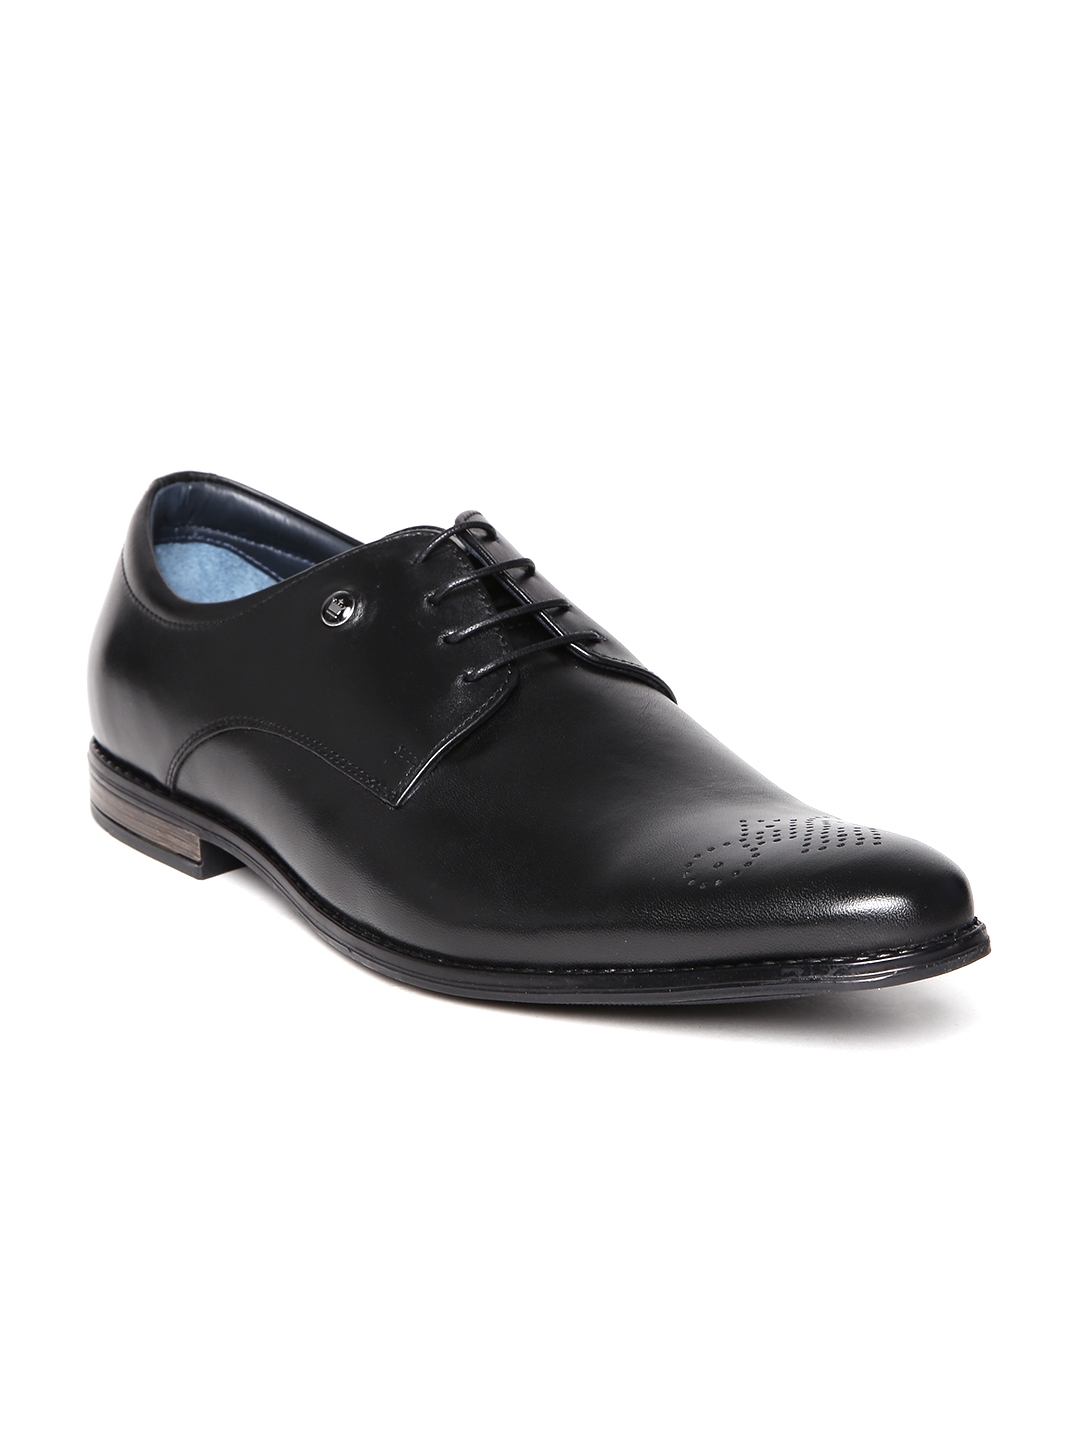 Buy Louis Philippe Men Black Genuine Leather Formal Shoes - Formal Shoes for Men 1166569 | Myntra